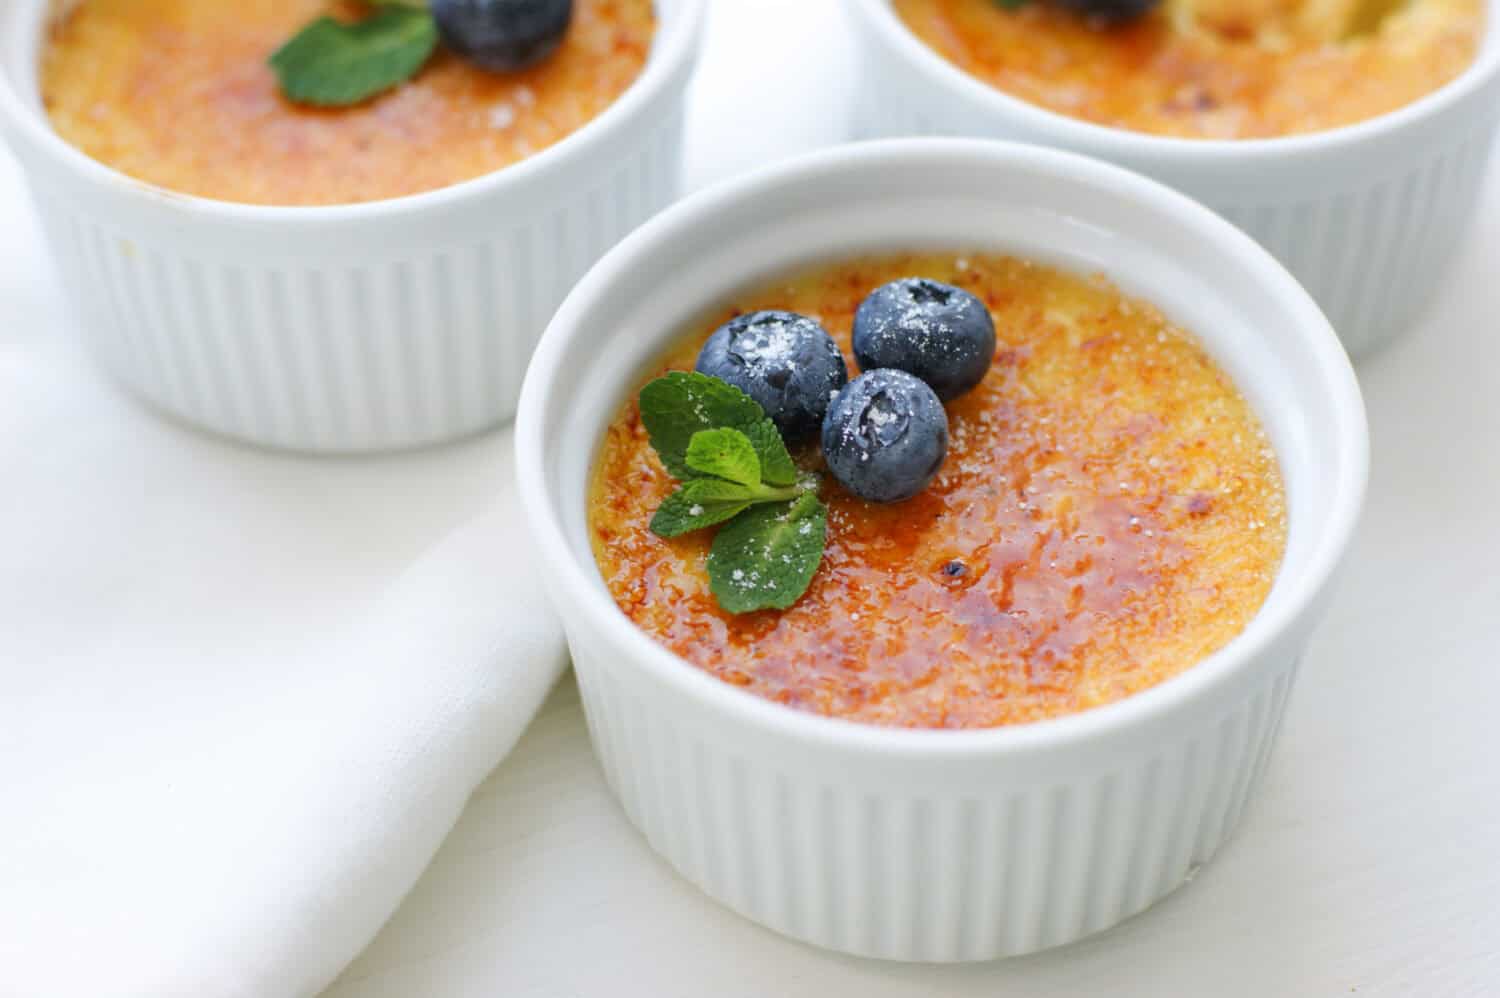 Creme brulee is a delicate creamy dessert with a delicious caramel crust, which is so nice to crack with a spoon.